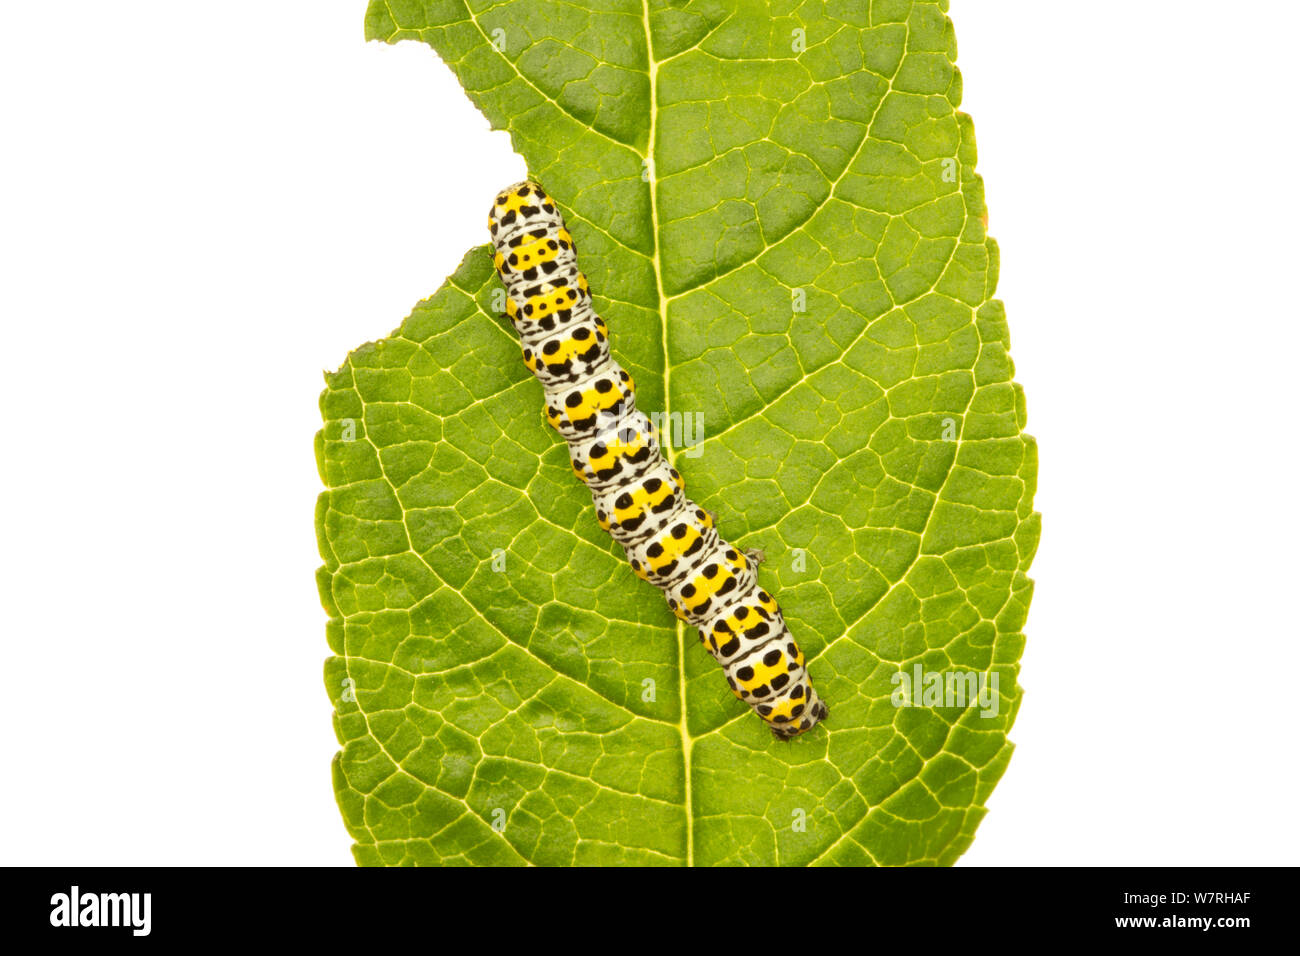 Mullein moth (Cucullia verbasci) caterpillar feeding on a Buddleia leaf, Leicestershire, England, UK, June. meetyourneighbours.net project Stock Photo